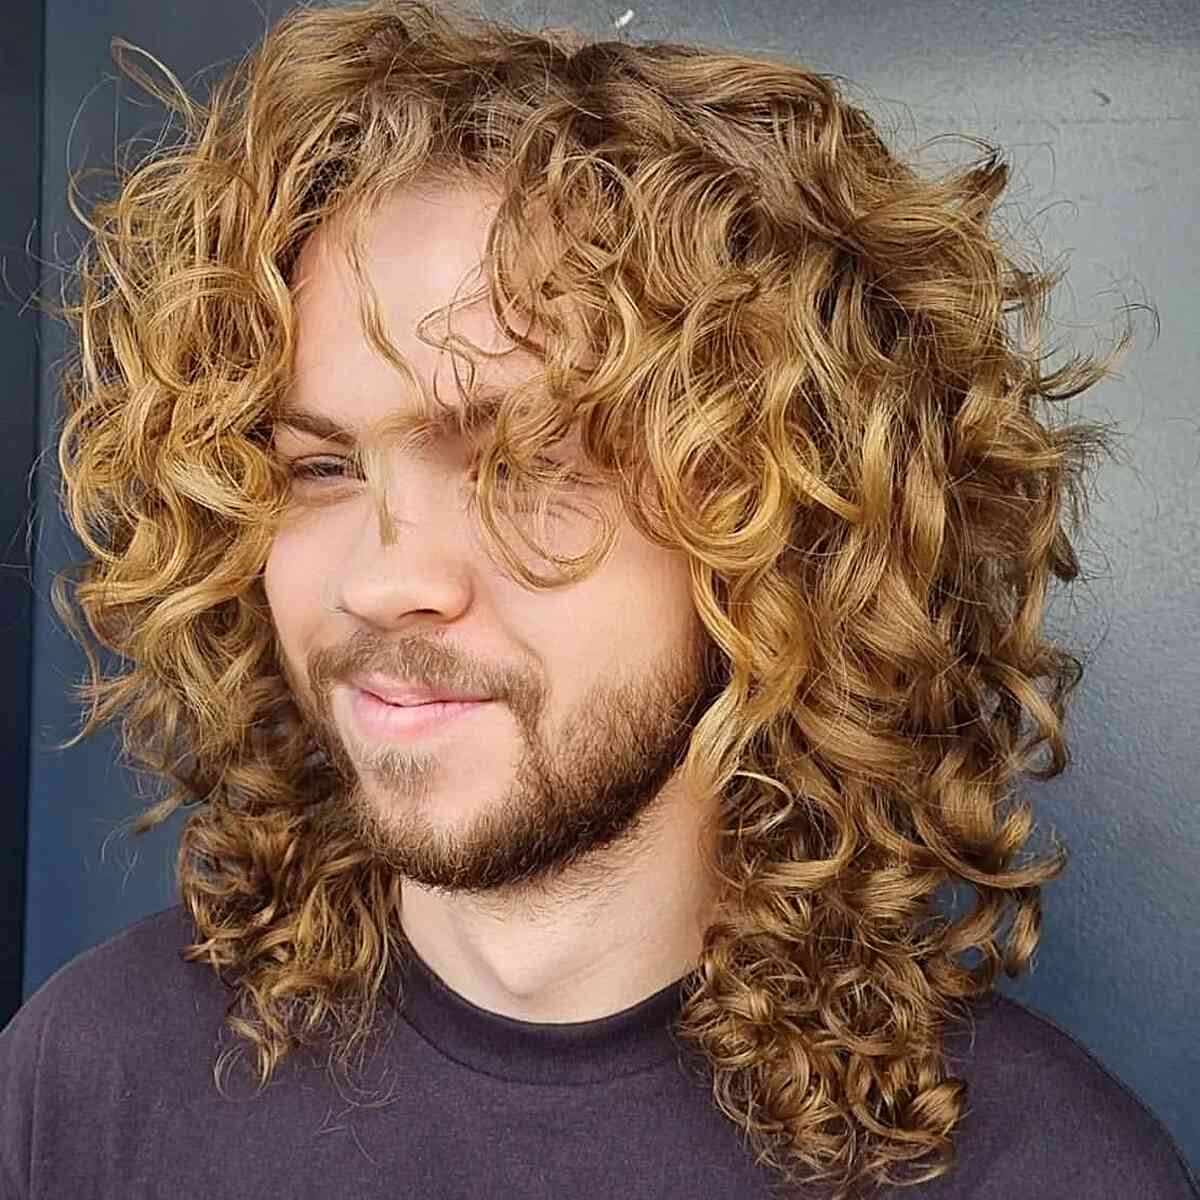 Wearable Naturally Long Curly Hair for Men